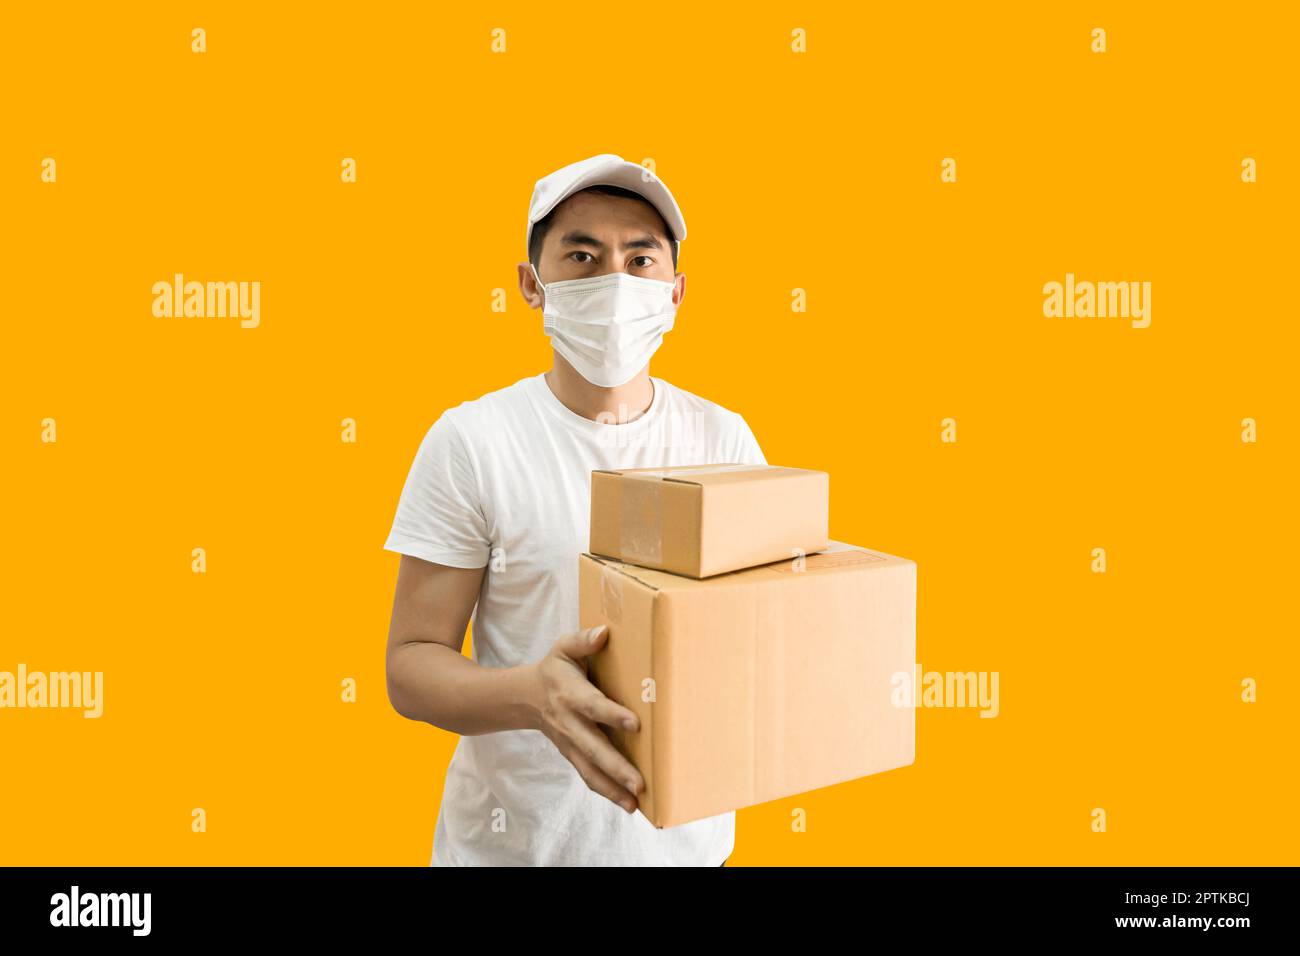 Young Asian delivery man wearing cap and white blank t-shirt holding parcel post box isolated on yellow background. express delivery service concept. Stock Photo